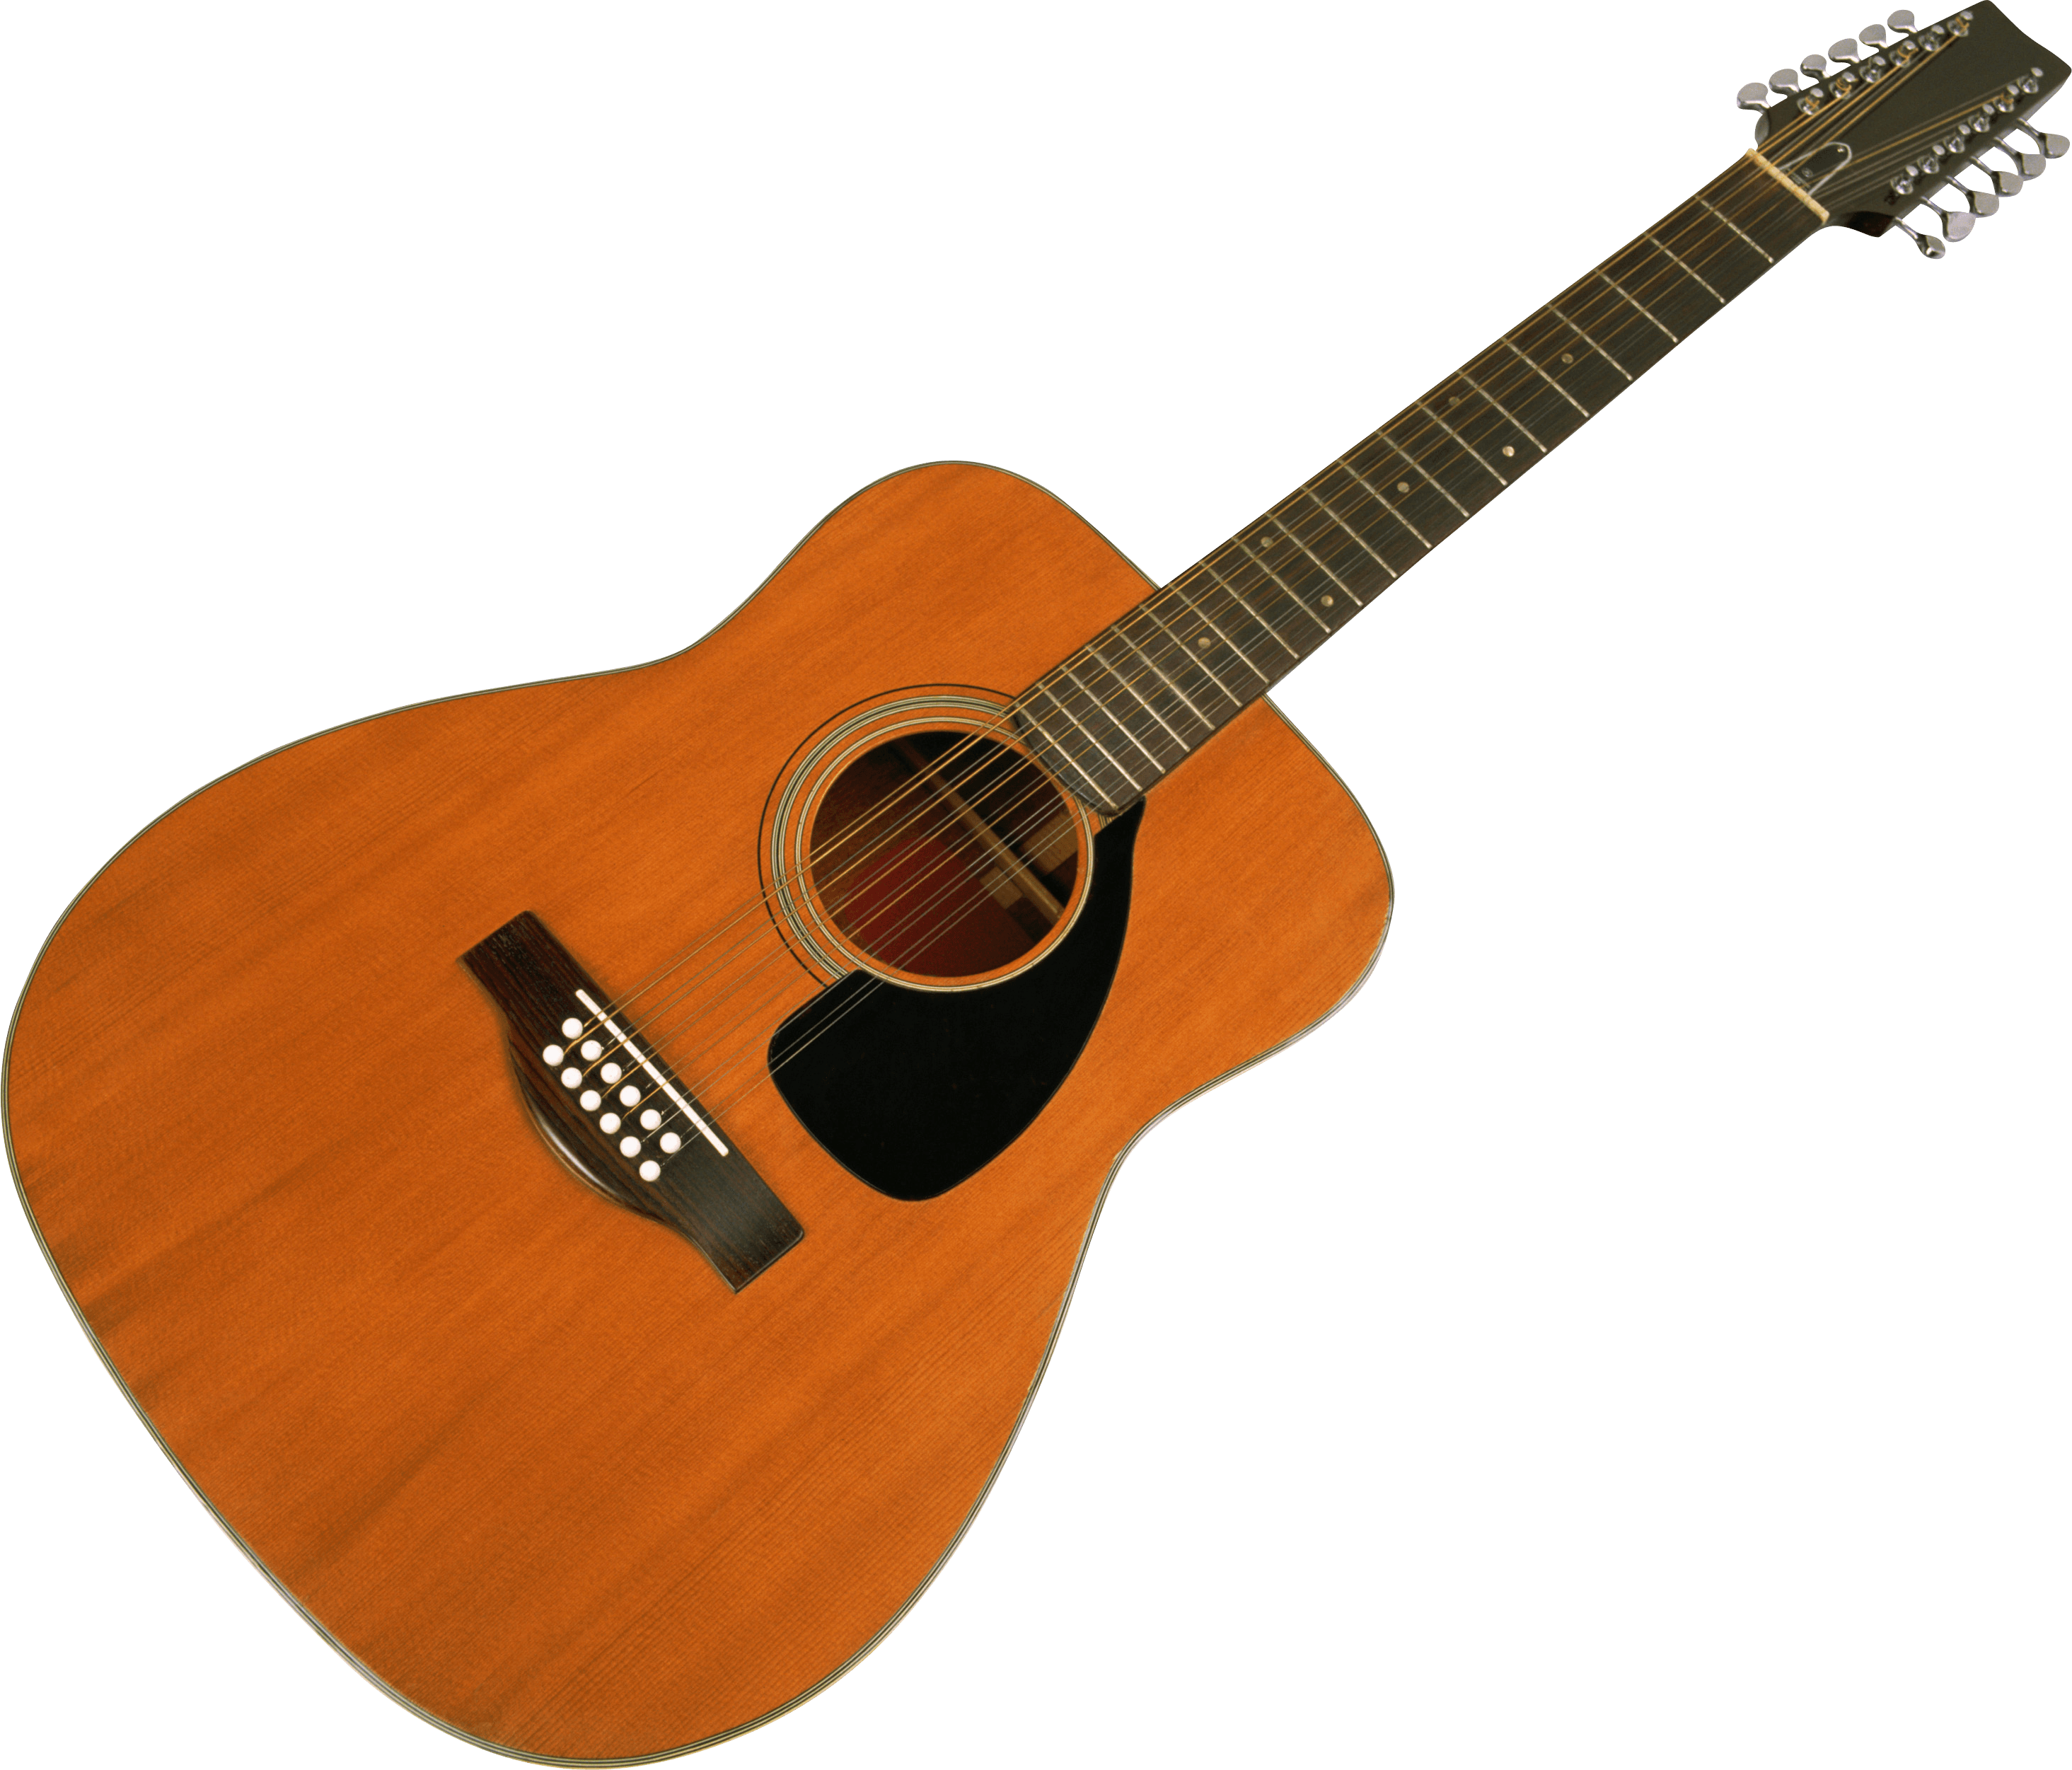 Download Guitar Free PNG Photo Images And Clipart FreePNGImg